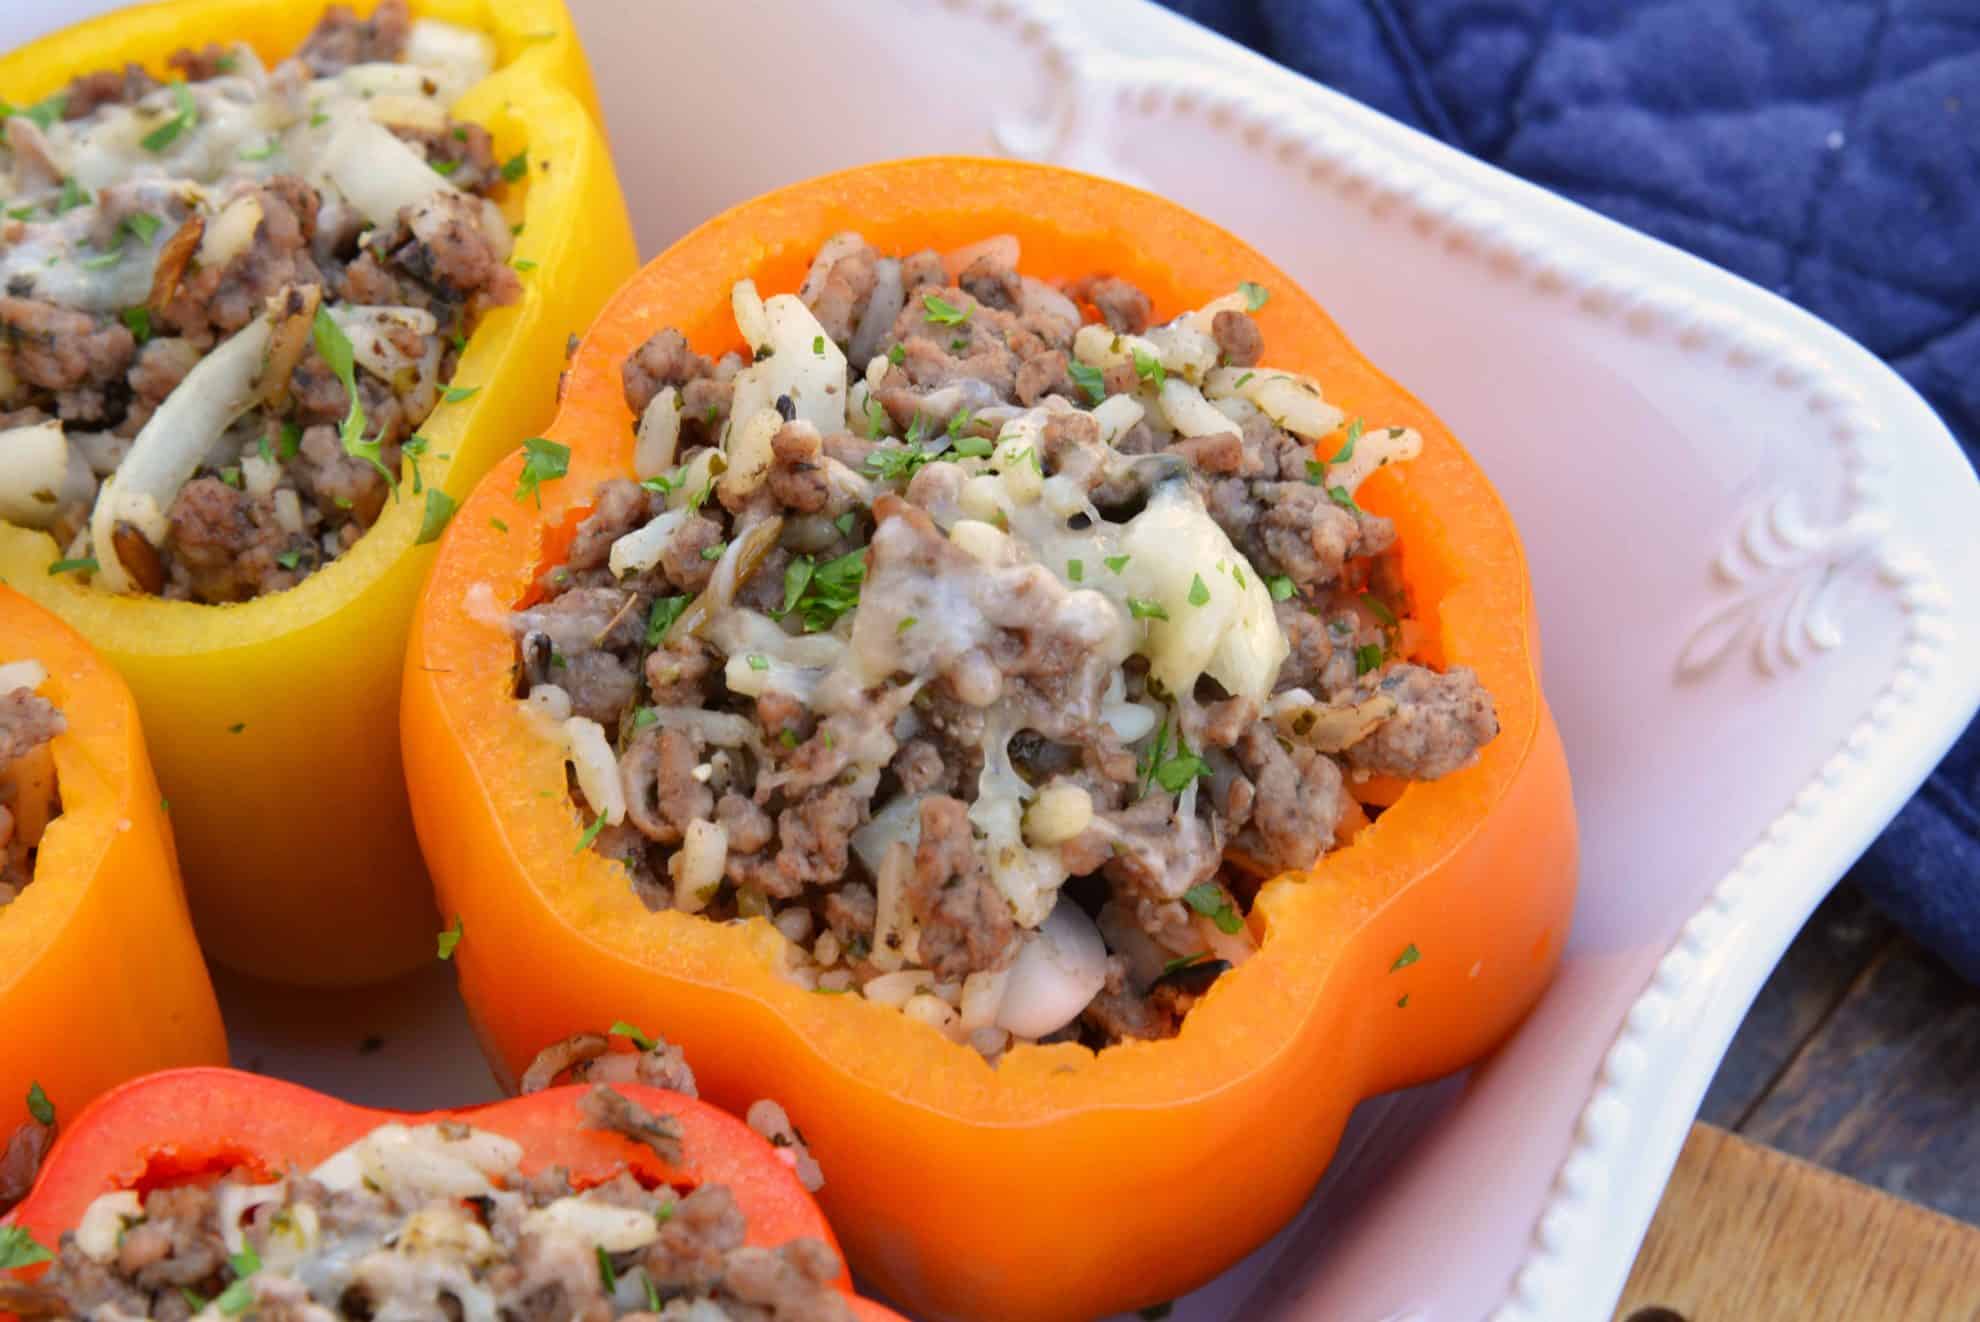 Classic Stuffed Peppers are bell peppers stuffed with ground beef, rice, cheese and spices. A timeless meal ready in 30 minutes and easily made ahead. #stuffedpeppers #stuffedbellpeppers www.savoryexperiments.com 